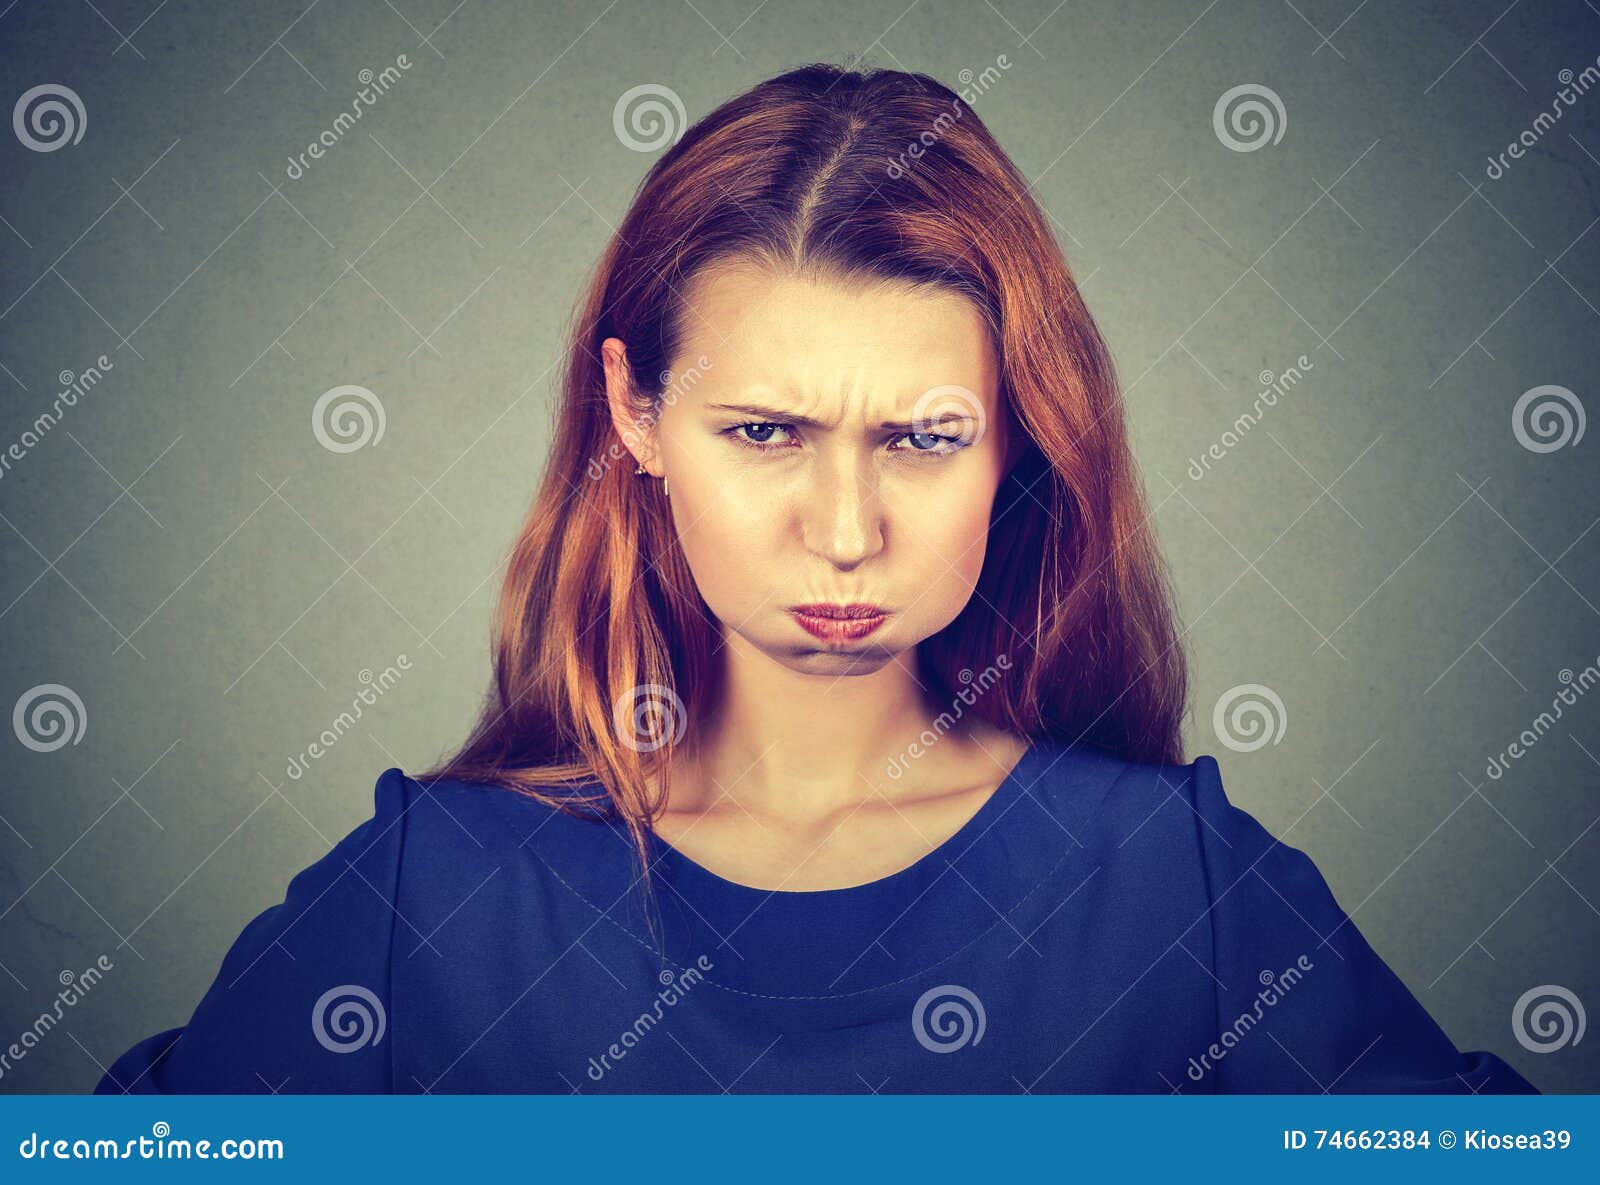 Angry Woman Puffing Out Cheeks About To Have Nervous Breakdown Stock